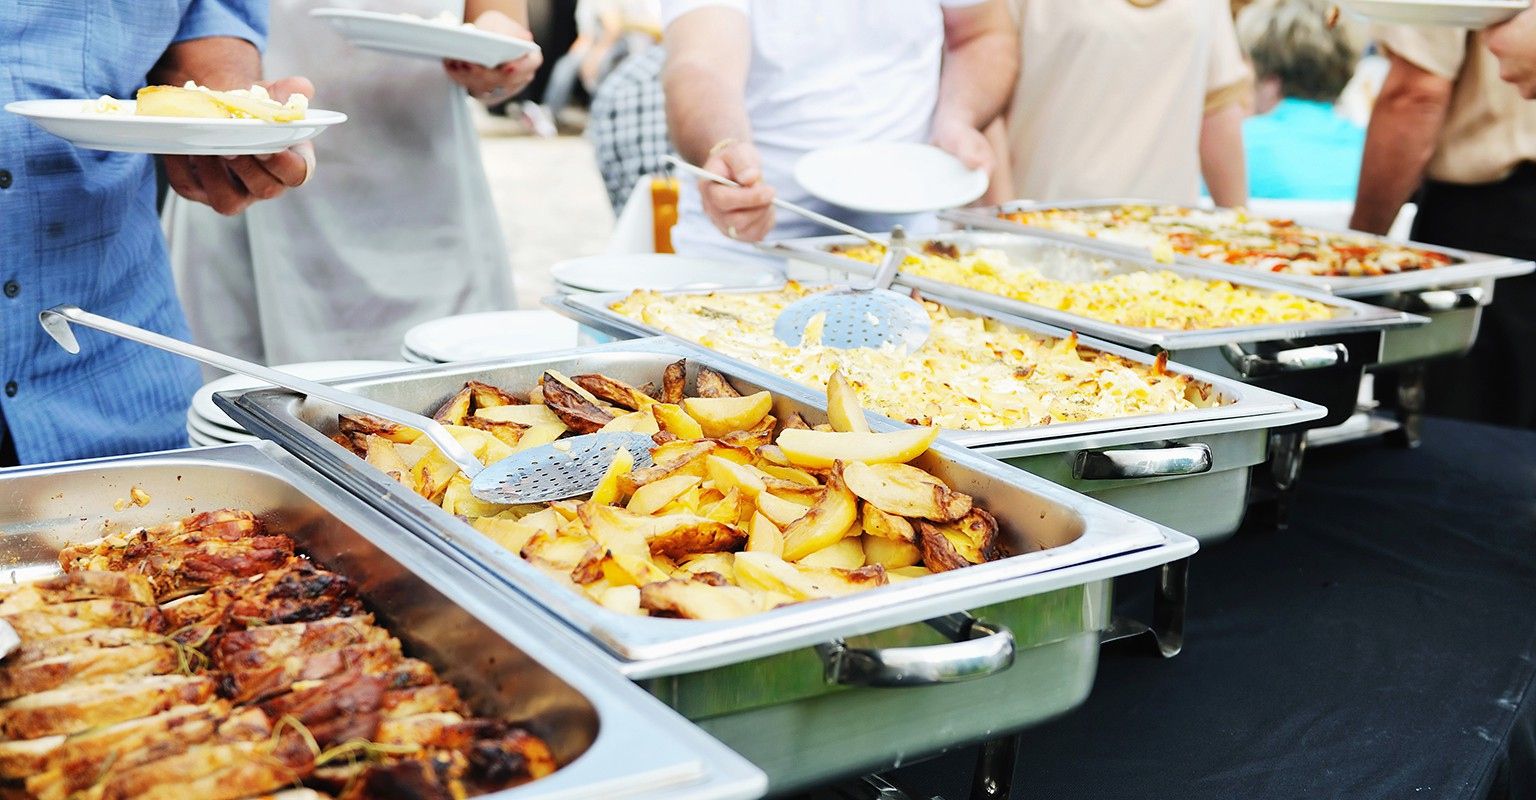 The 10 Best Italian Food Caterers Near Me (with Free Estimates)